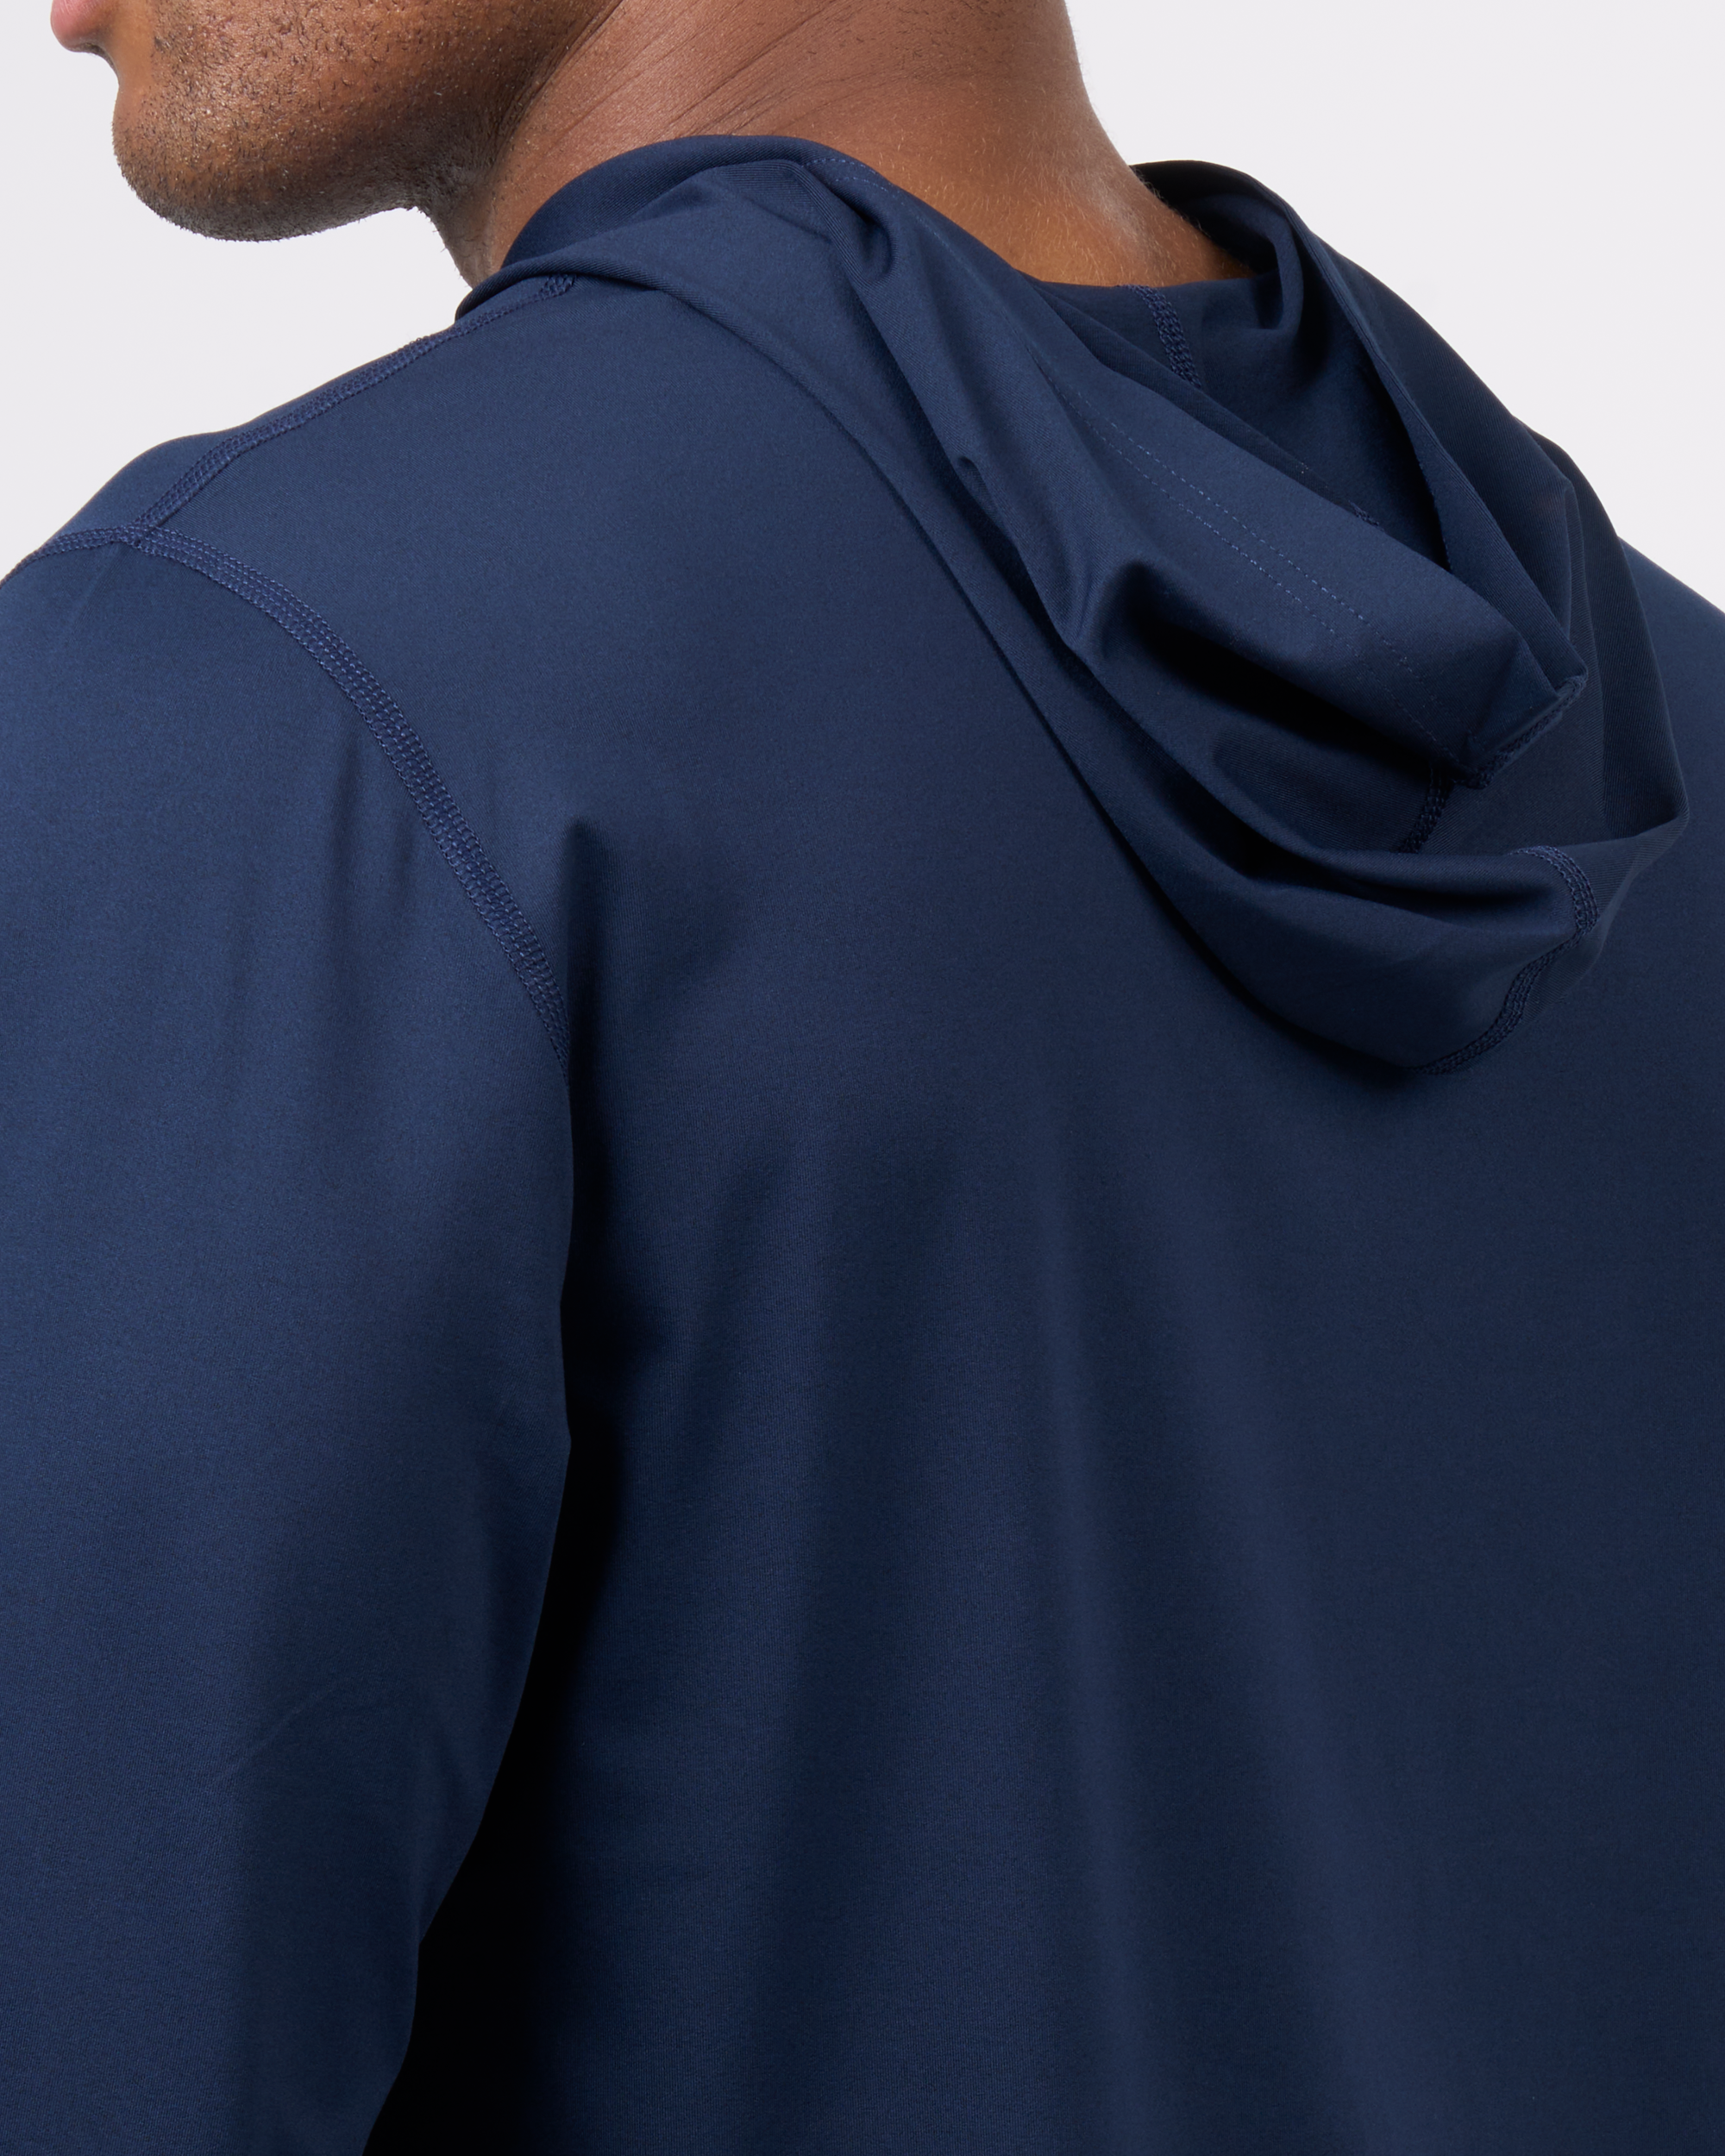 Foreign Rider Co Technical Fabric Navy Long-Sleeve Hooded T-Shirt Shoulder Hood Detail